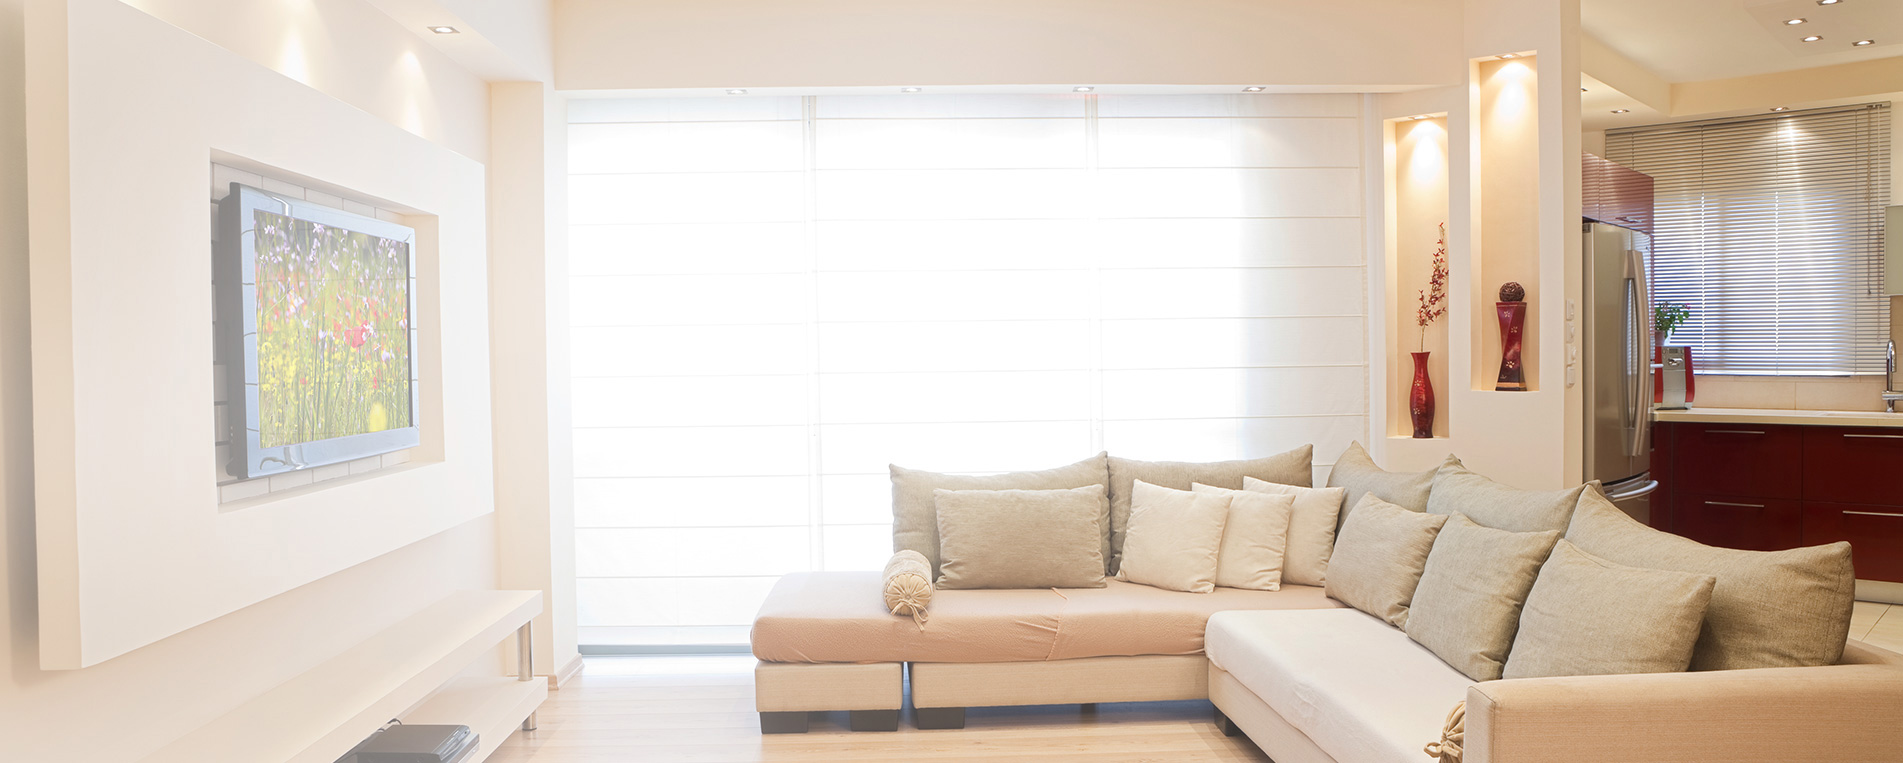 Best Blinds To Improve Your Privacy